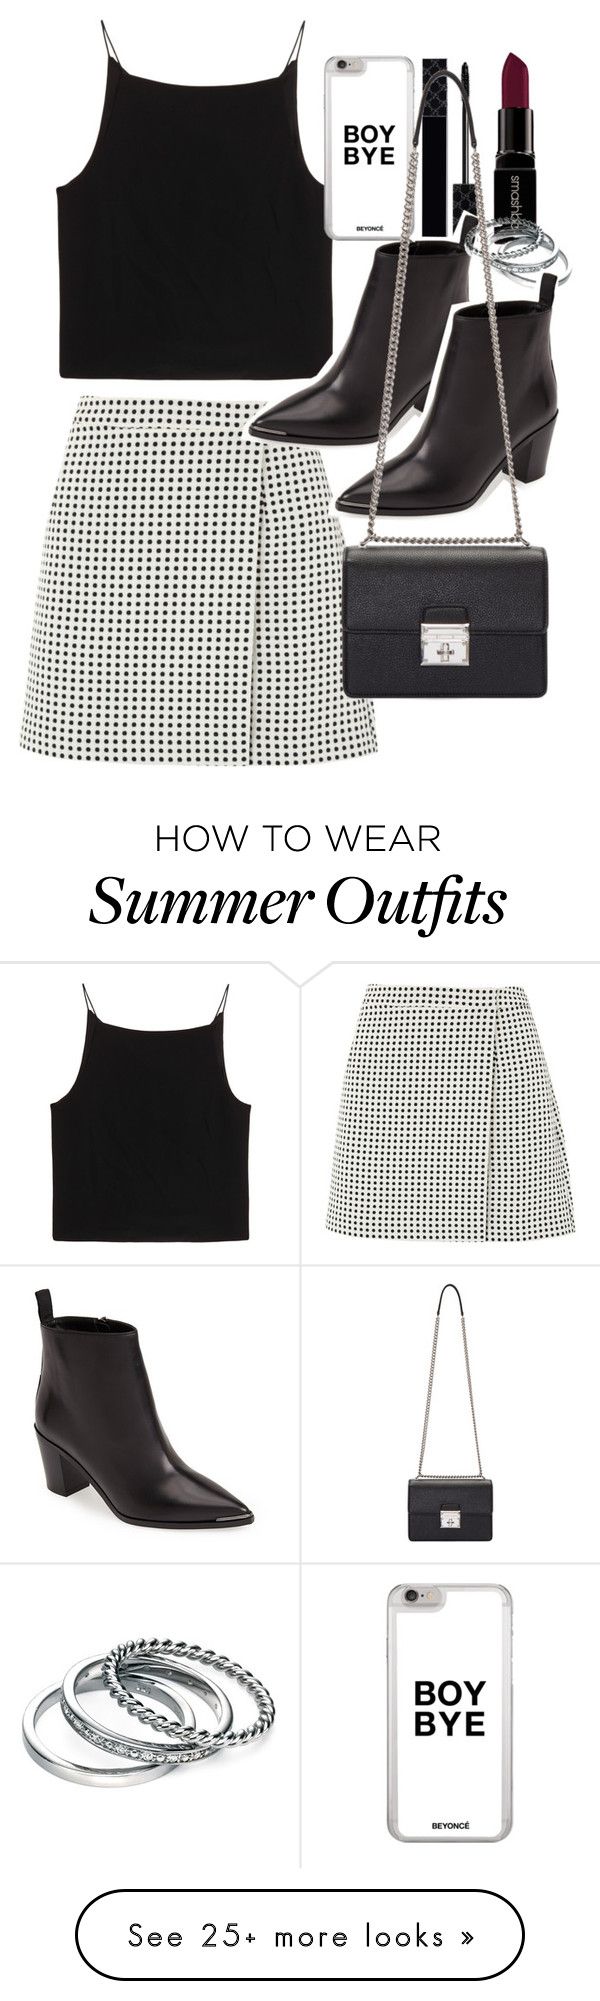 "Outfit for summer with a mini skirt and boots" by ferned on Polyvore ...